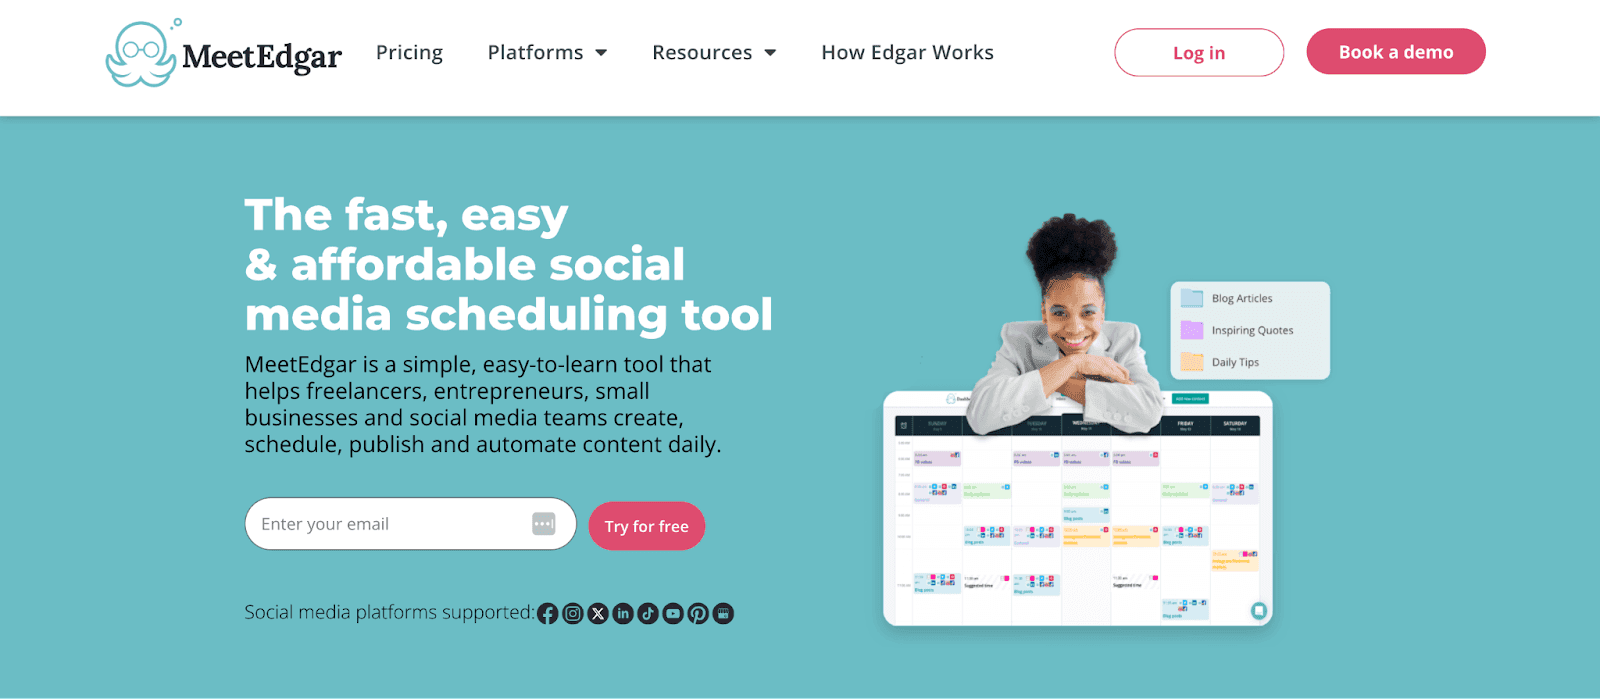 The fast, easy & affordable social media scheduling tool